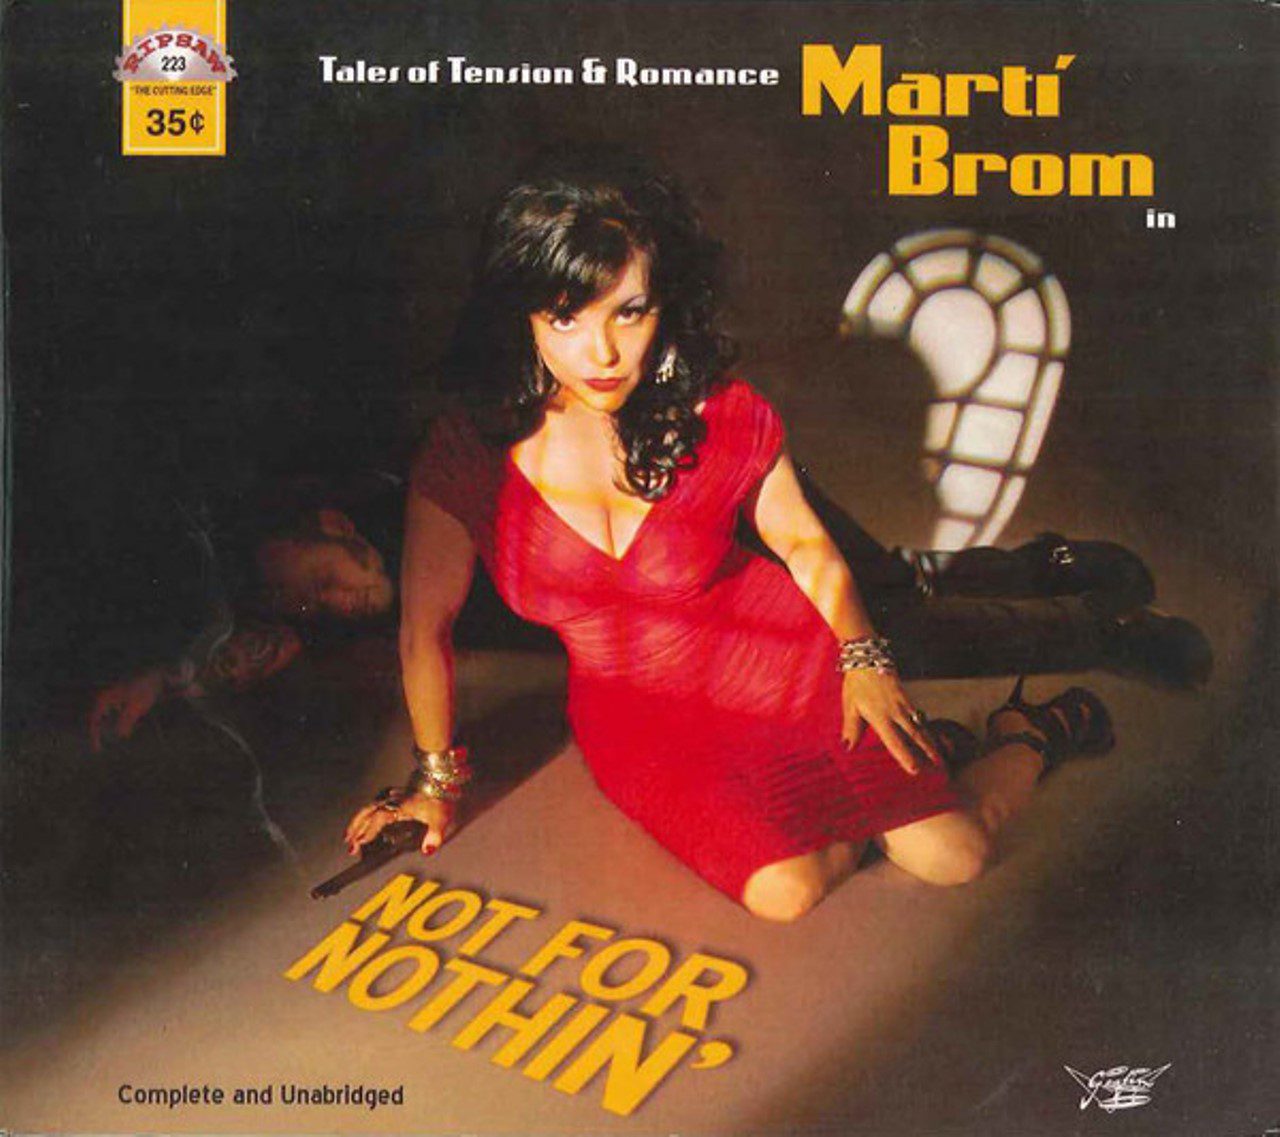 Marti Brom - Not For Nothin’ cover album